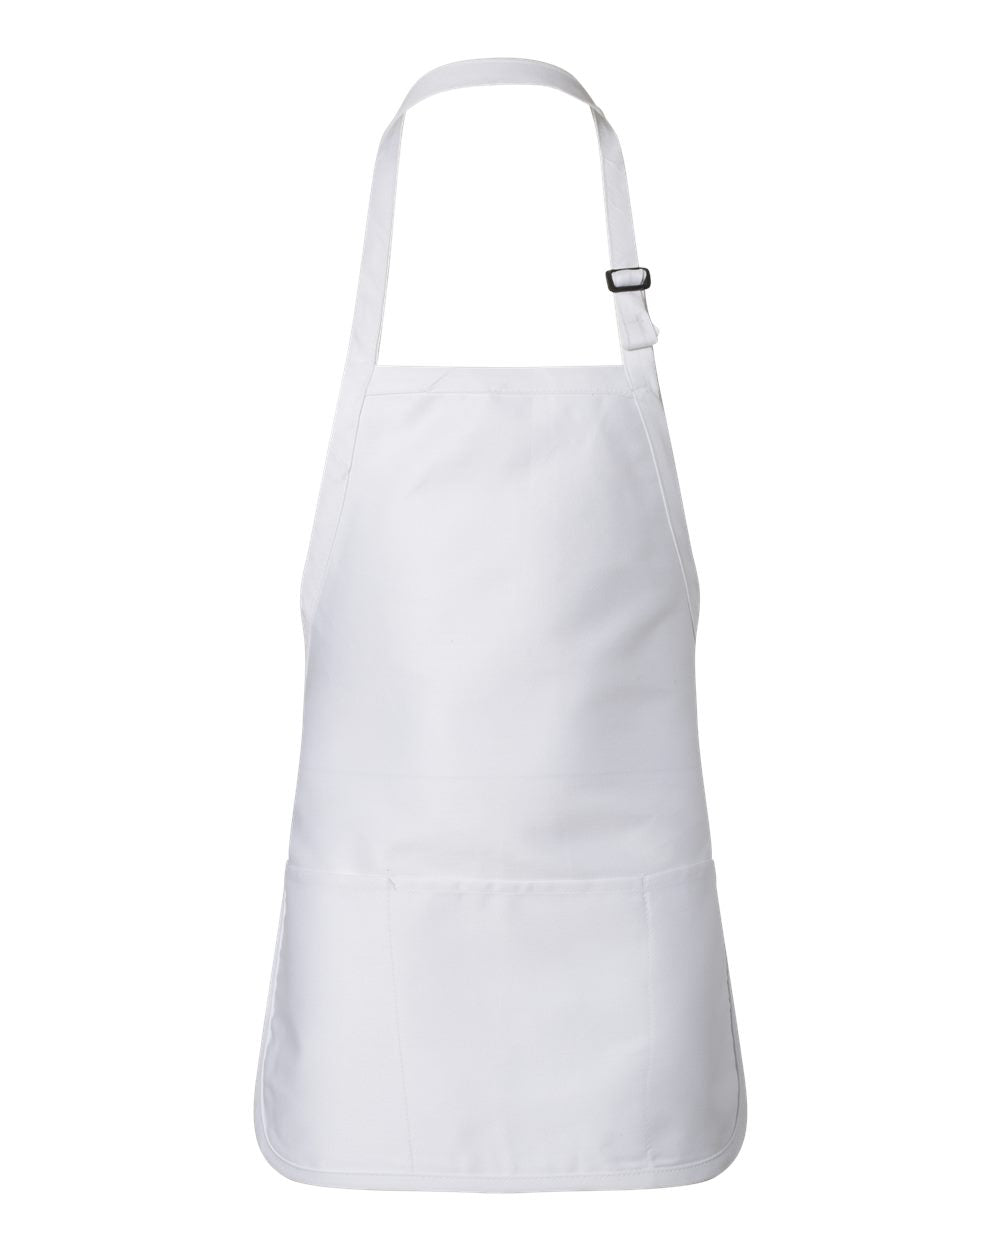 Q-Tees Full-Length Apron with Pouch Pocket Q4250 #color_White